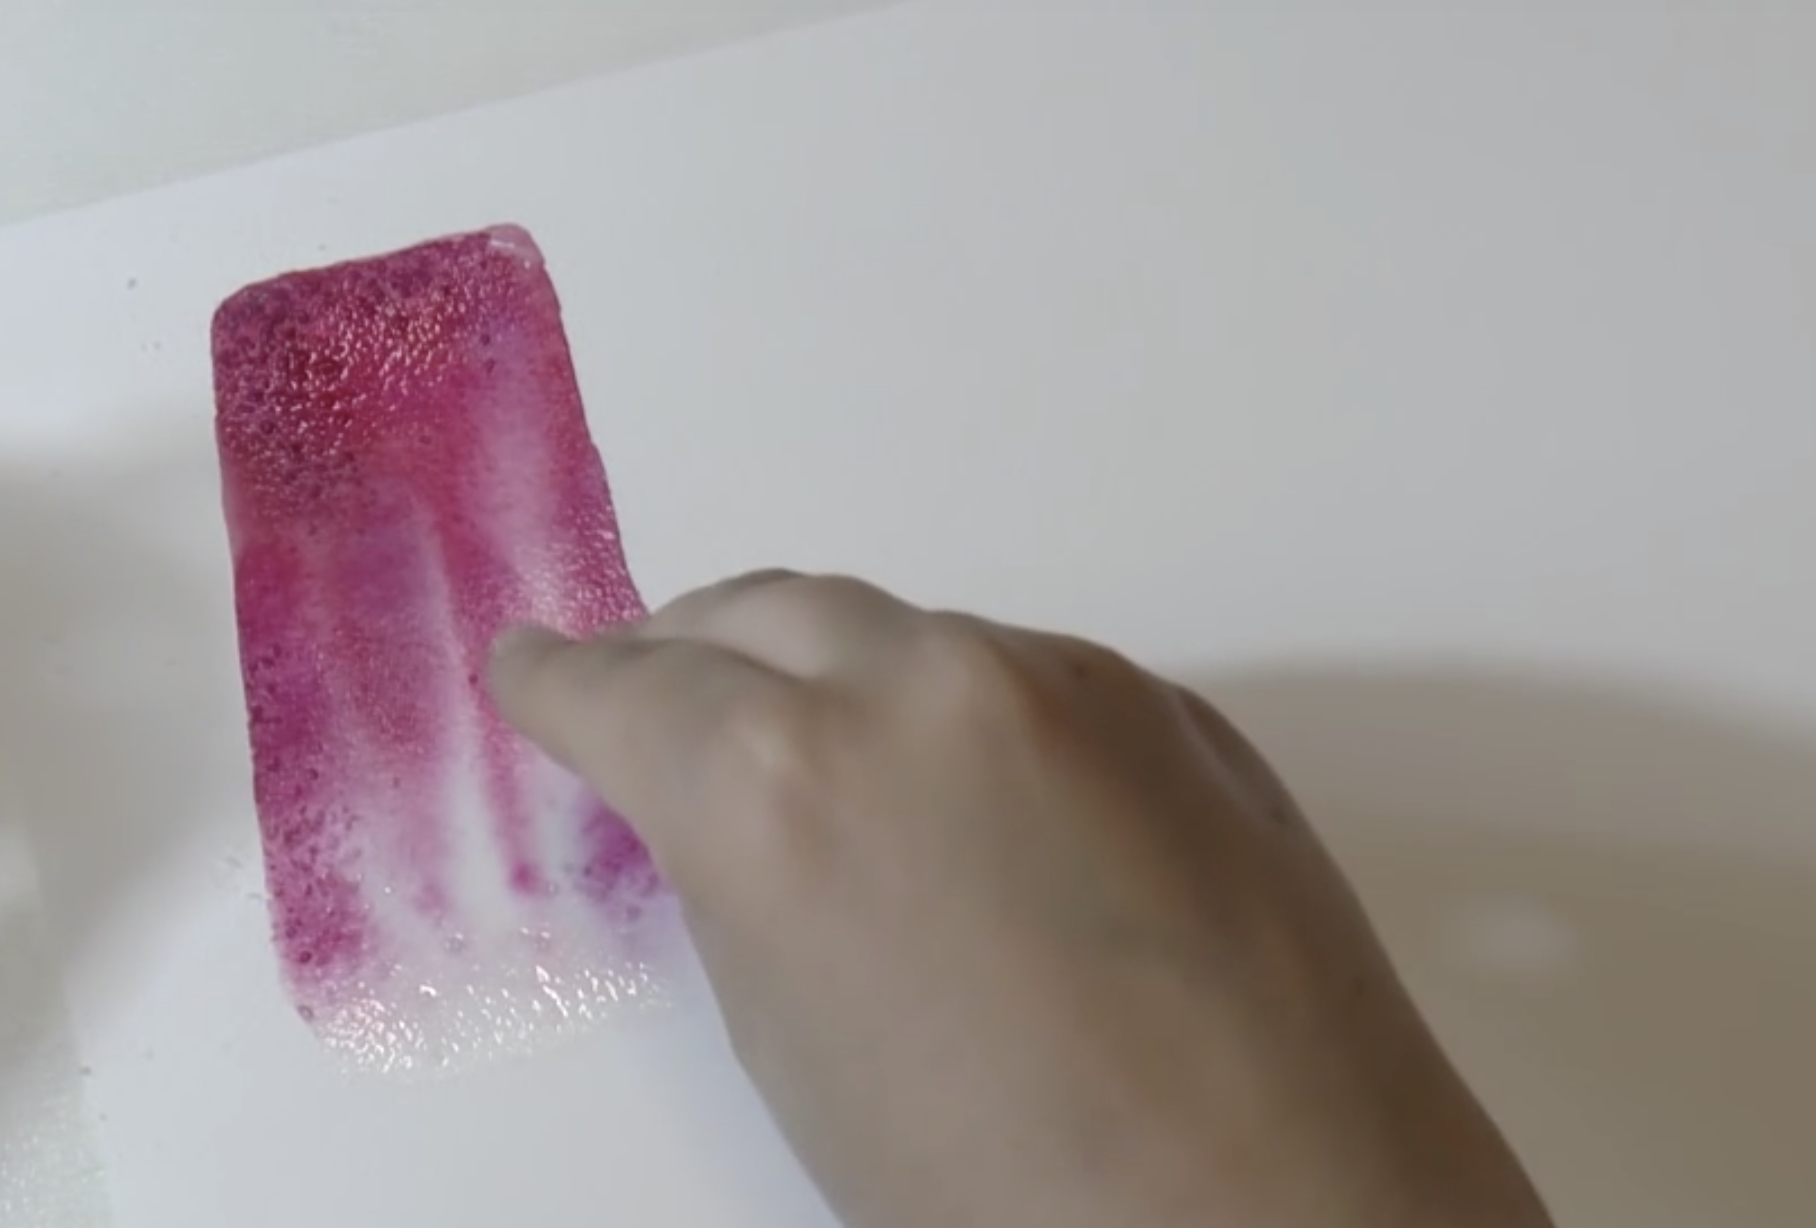 easy-watercolor-ideas-techniques-how-to-paint-a-watercolor-popsicle - Step 7.2